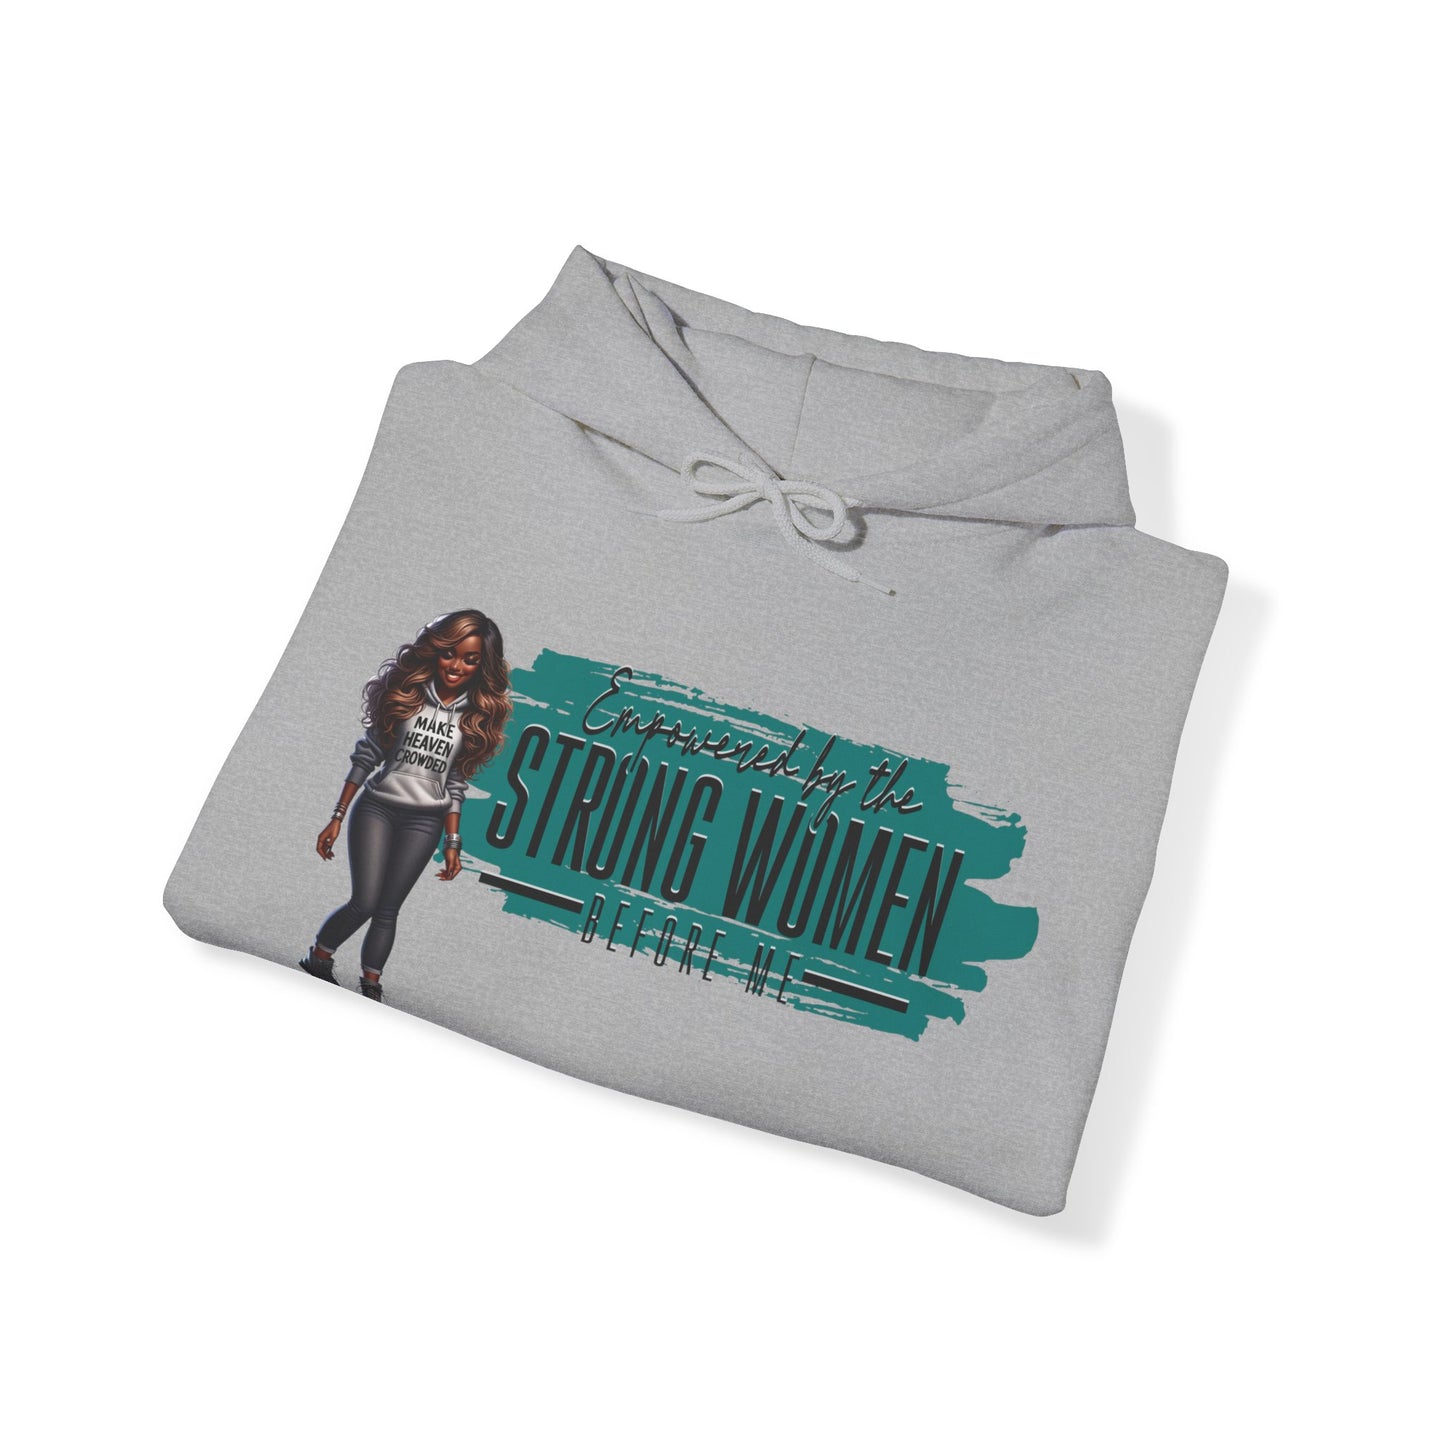 Empowered By Hooded Sweatshirt